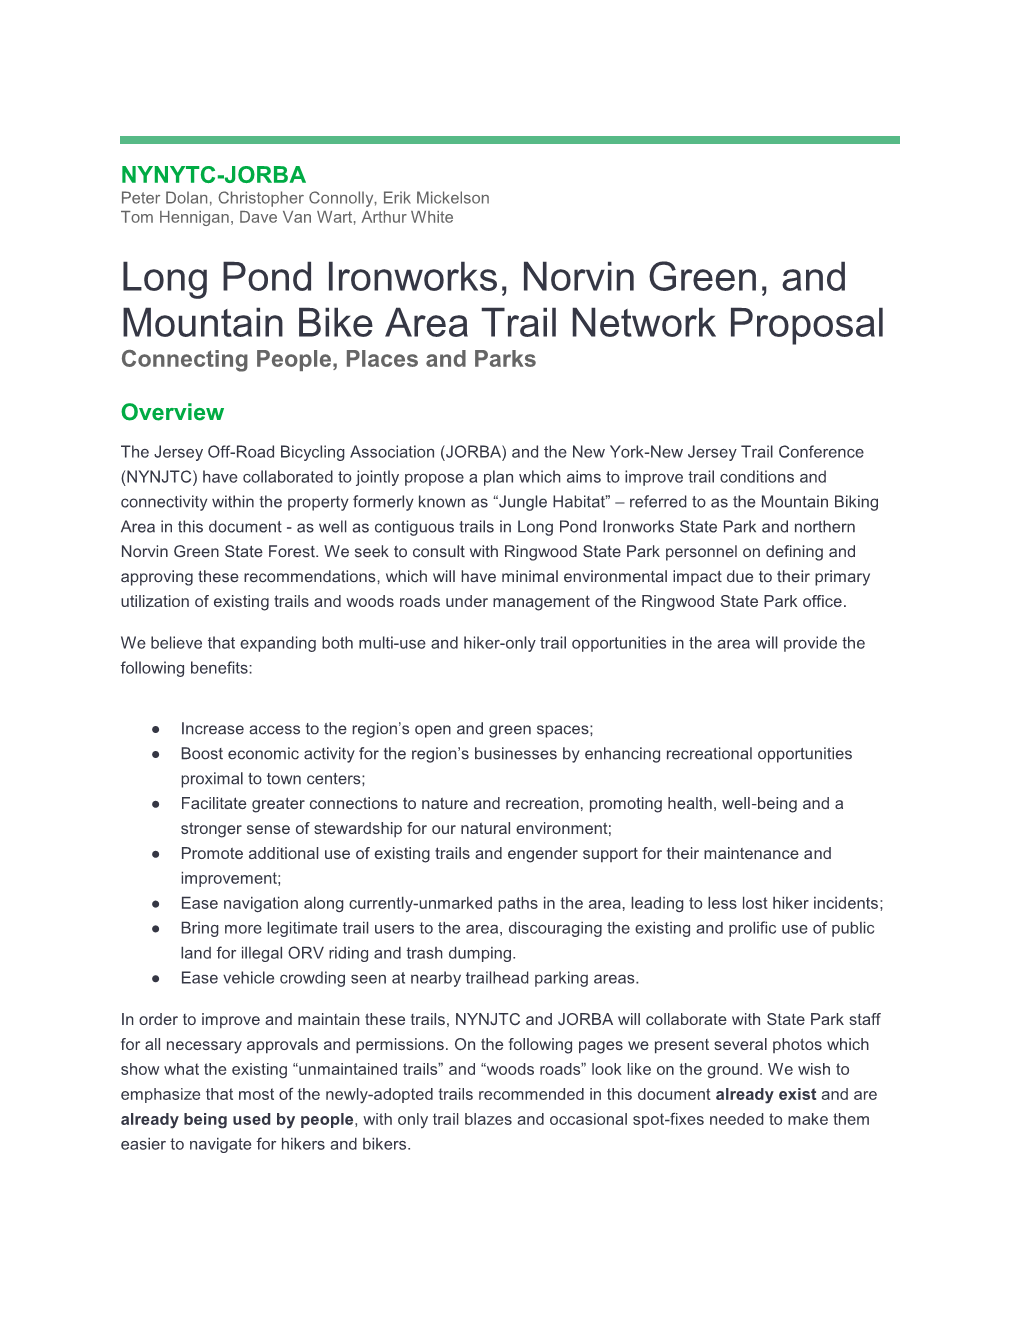 Long Pond Ironworks, Norvin Green, and Mountain Bike Area Trail Network Proposal Connecting People, Places and Parks